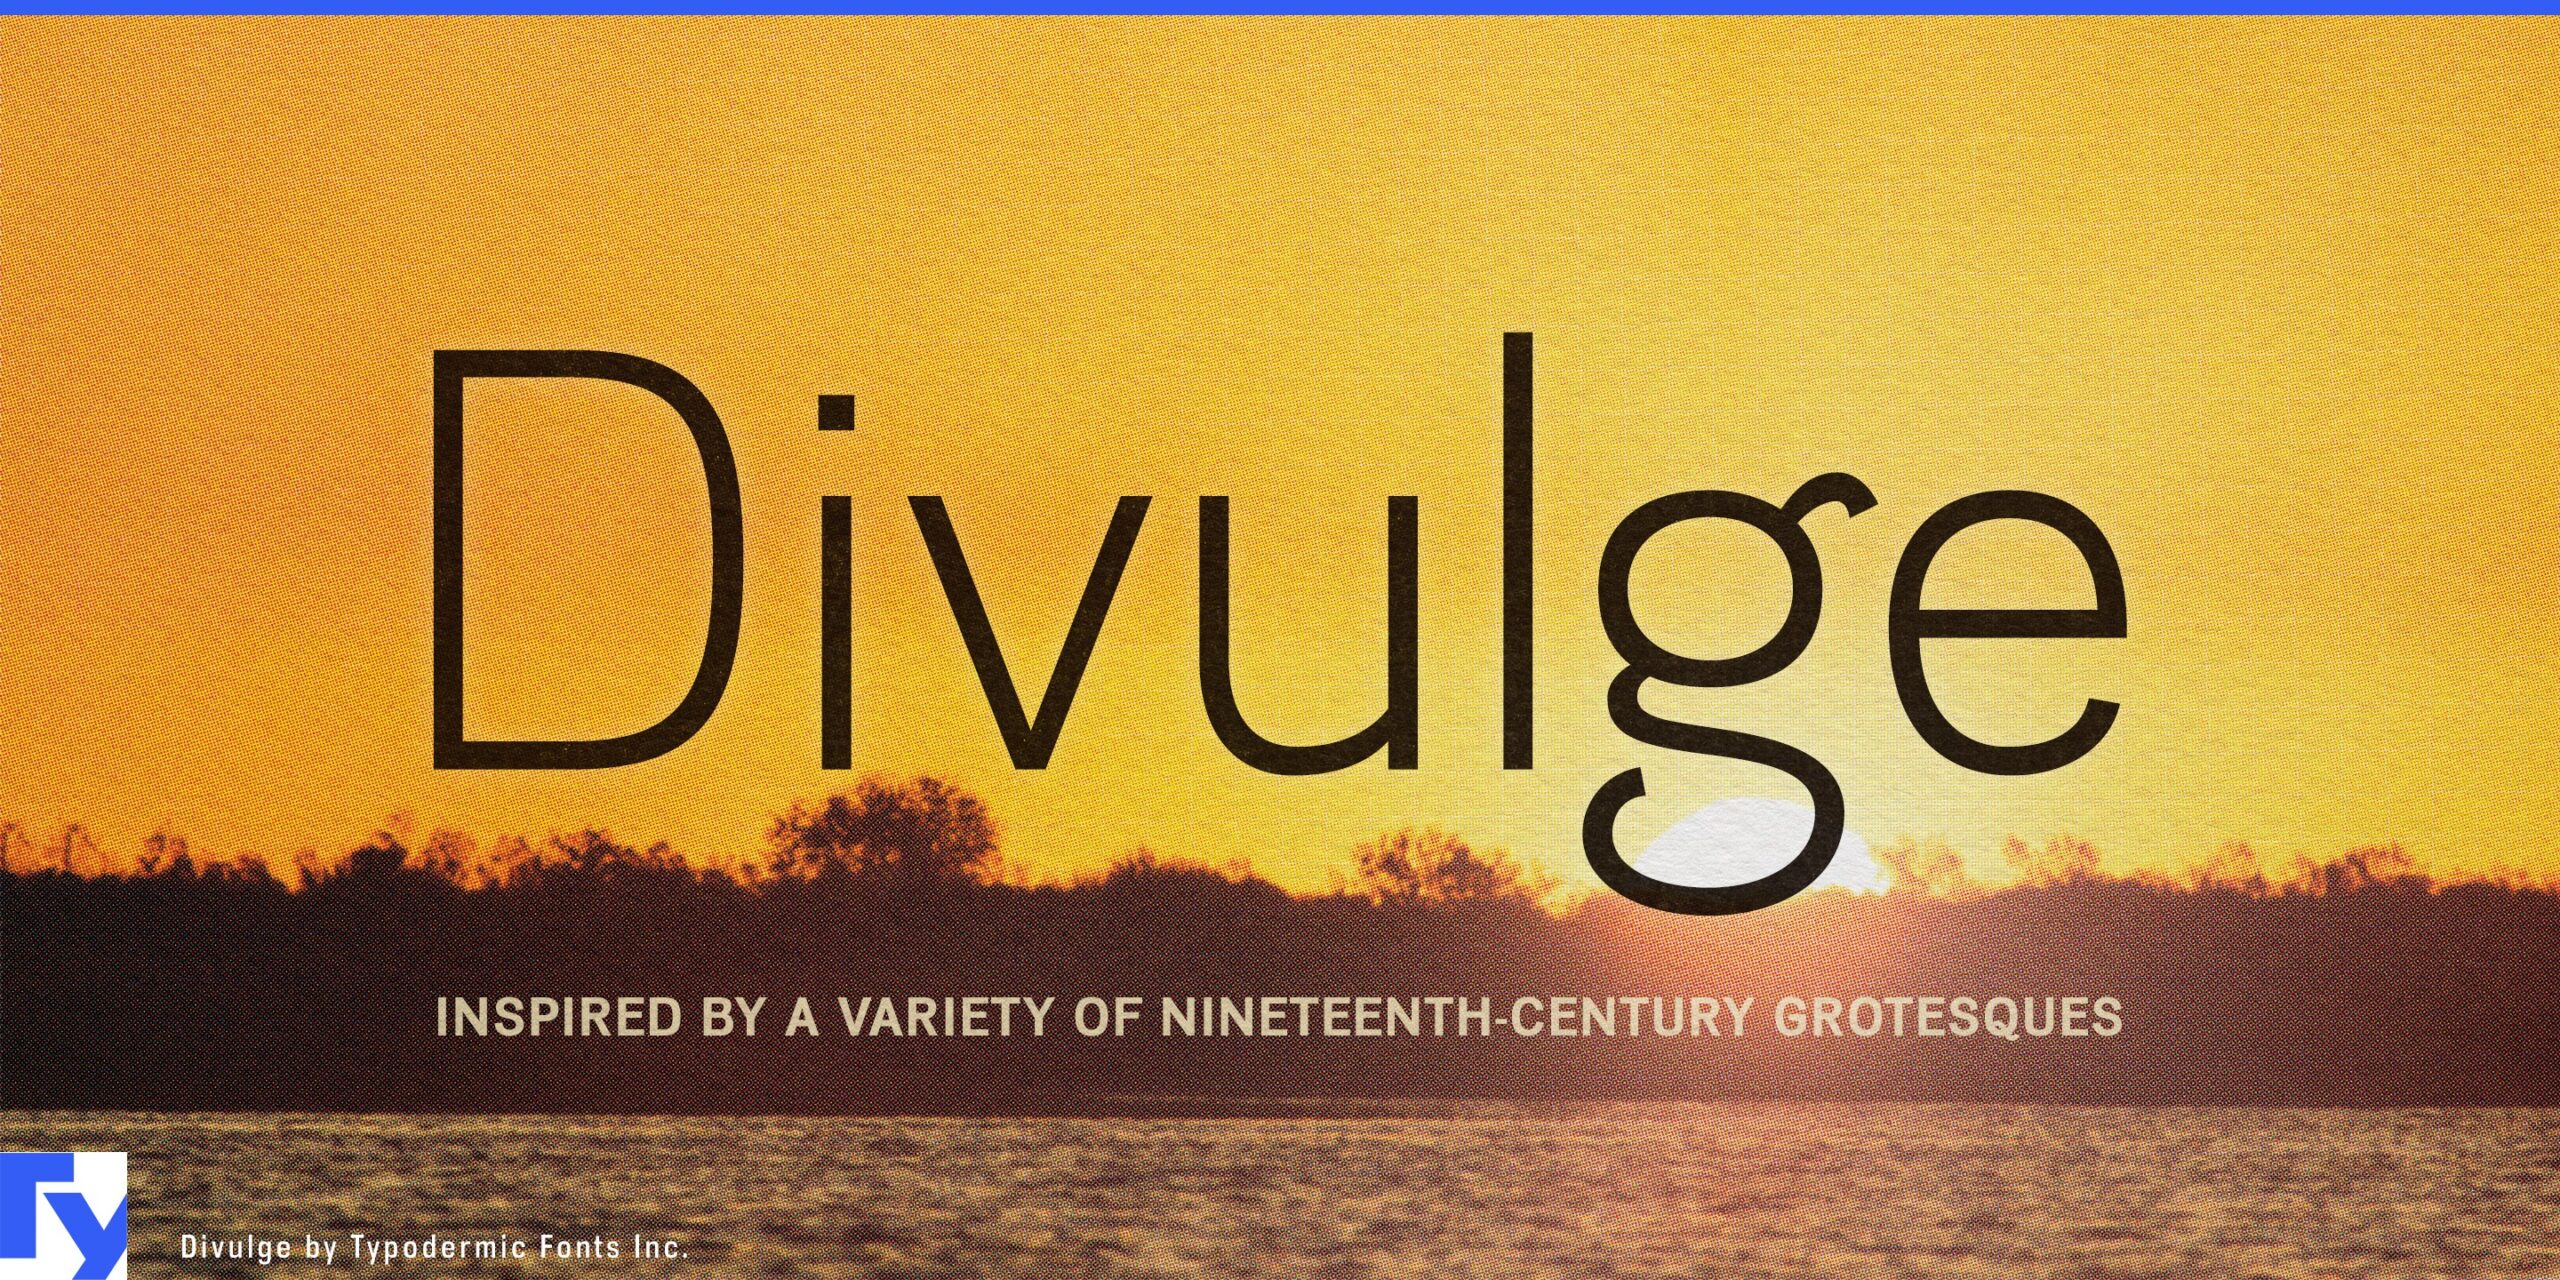 Timeless Sophistication: Add Class with Divulge Typeface's Italics